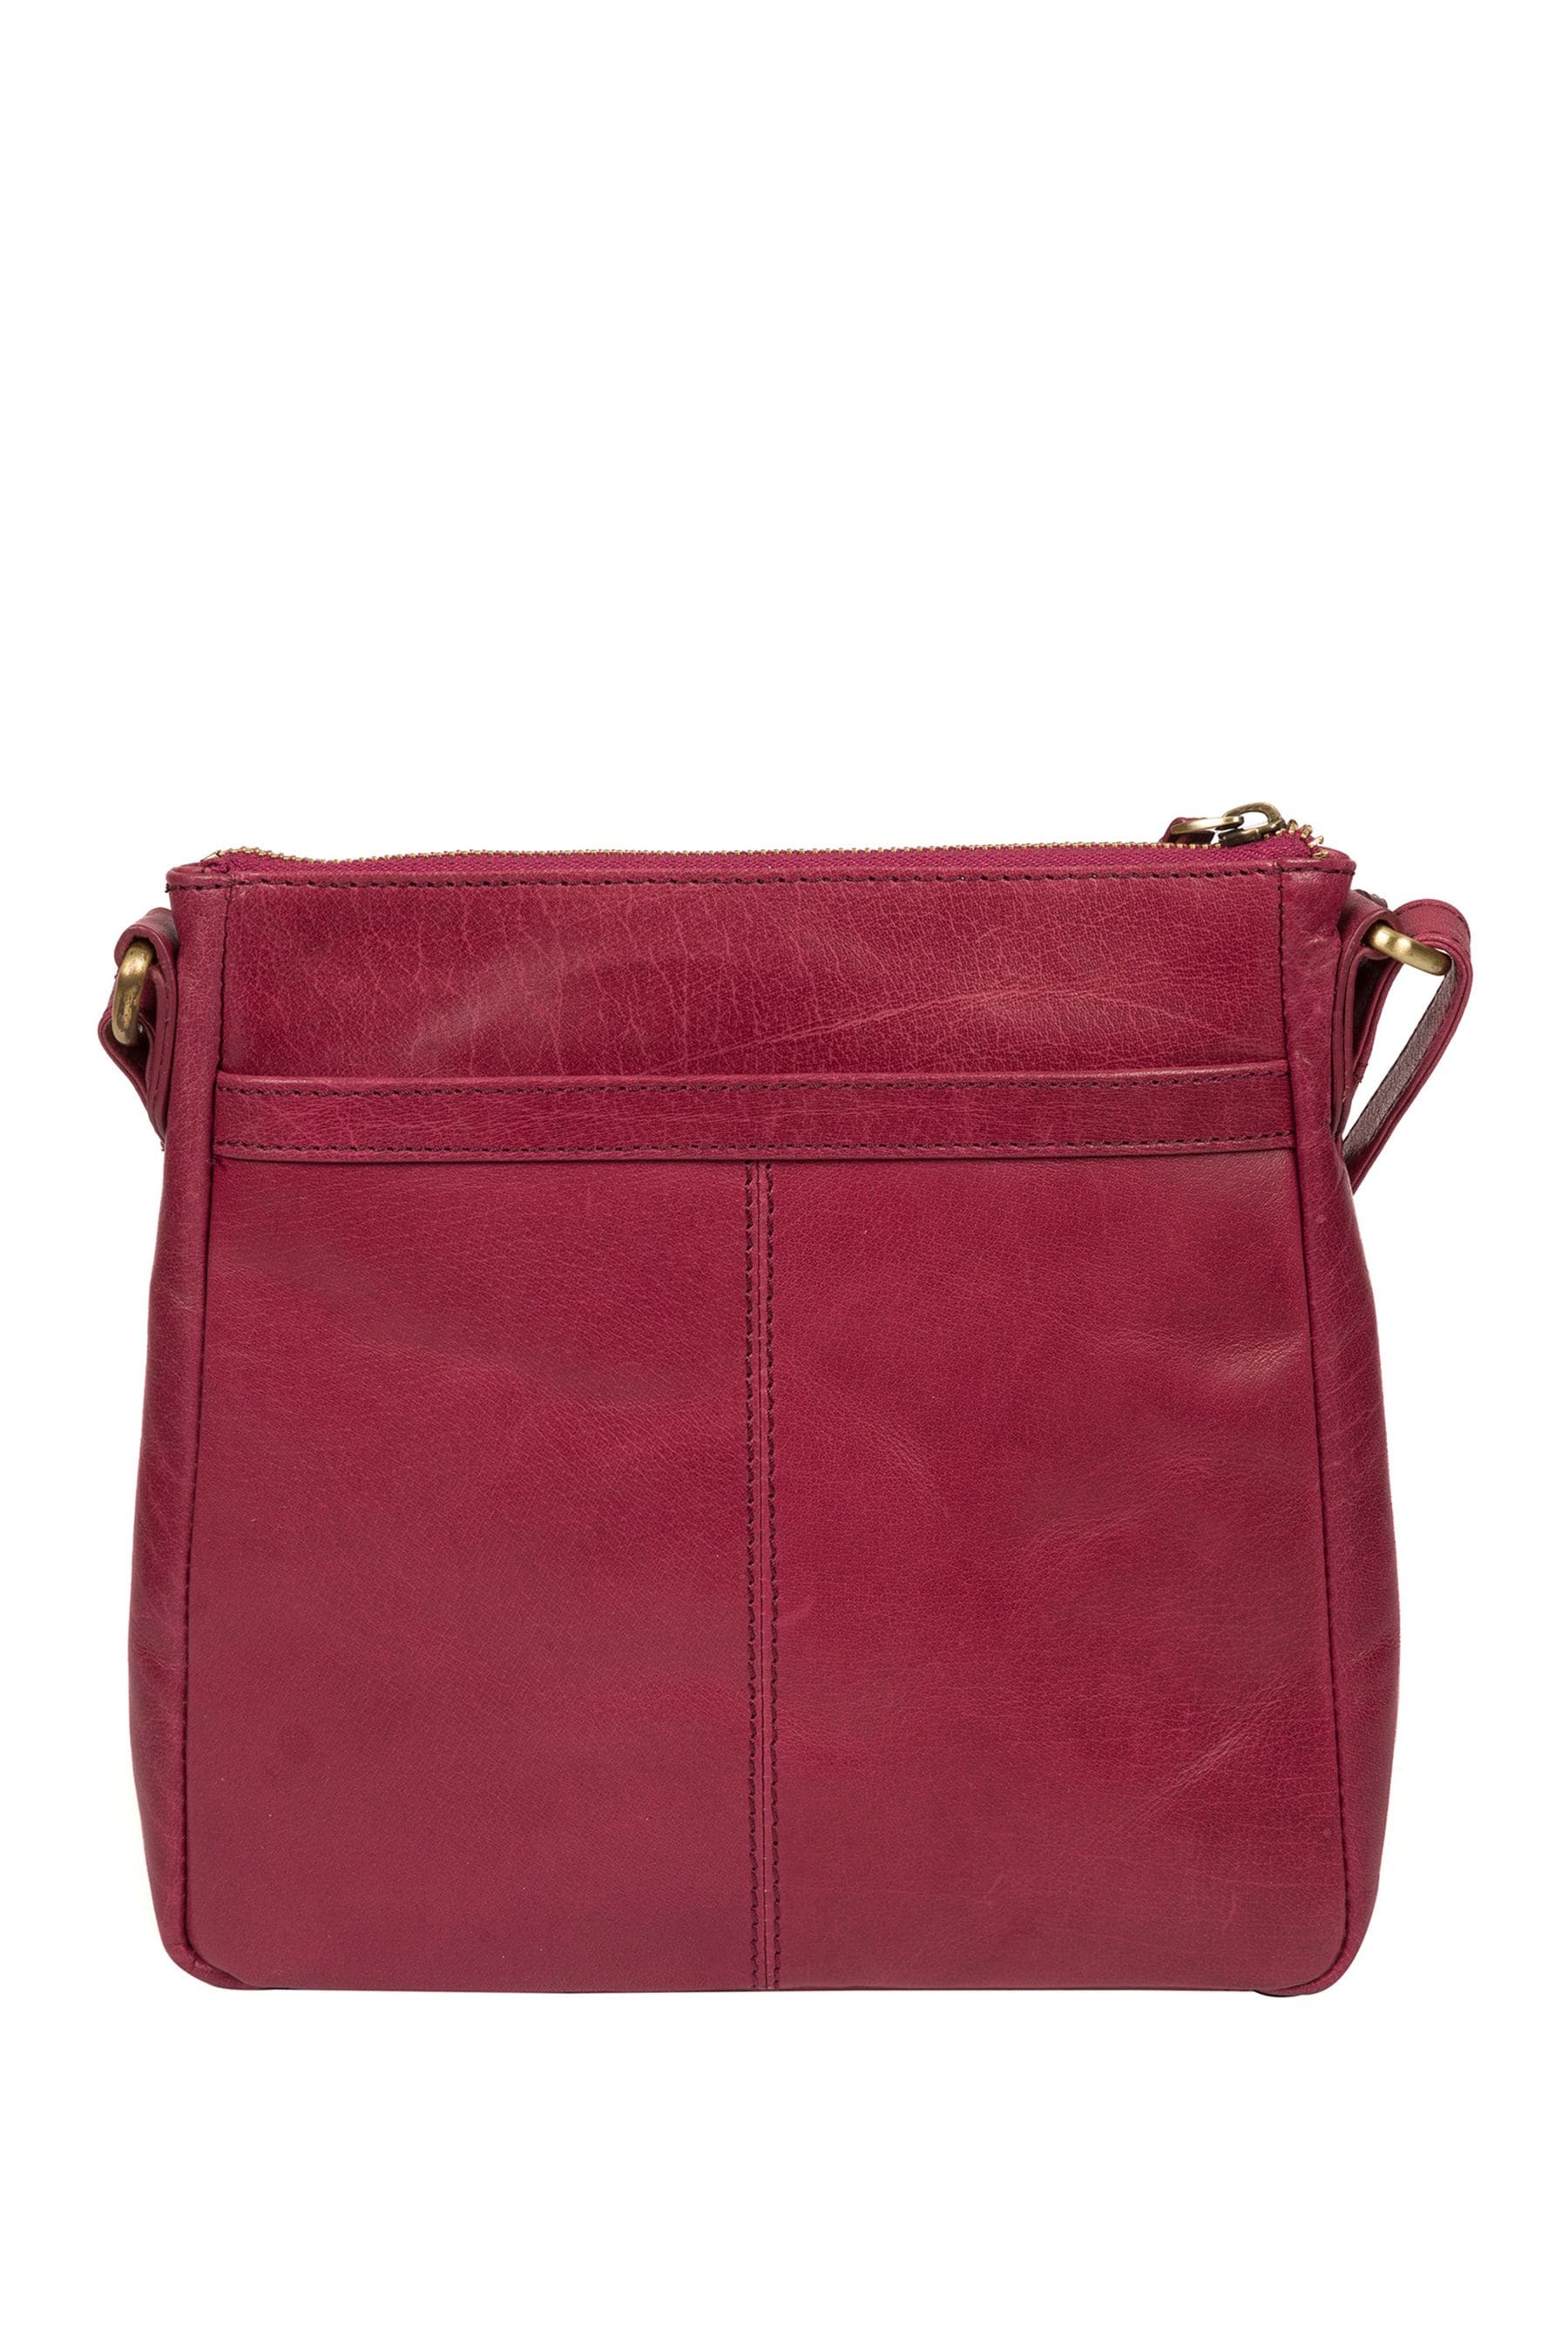 Buy Conkca Shona Leather Cross-Body Bag from the Next UK online shop